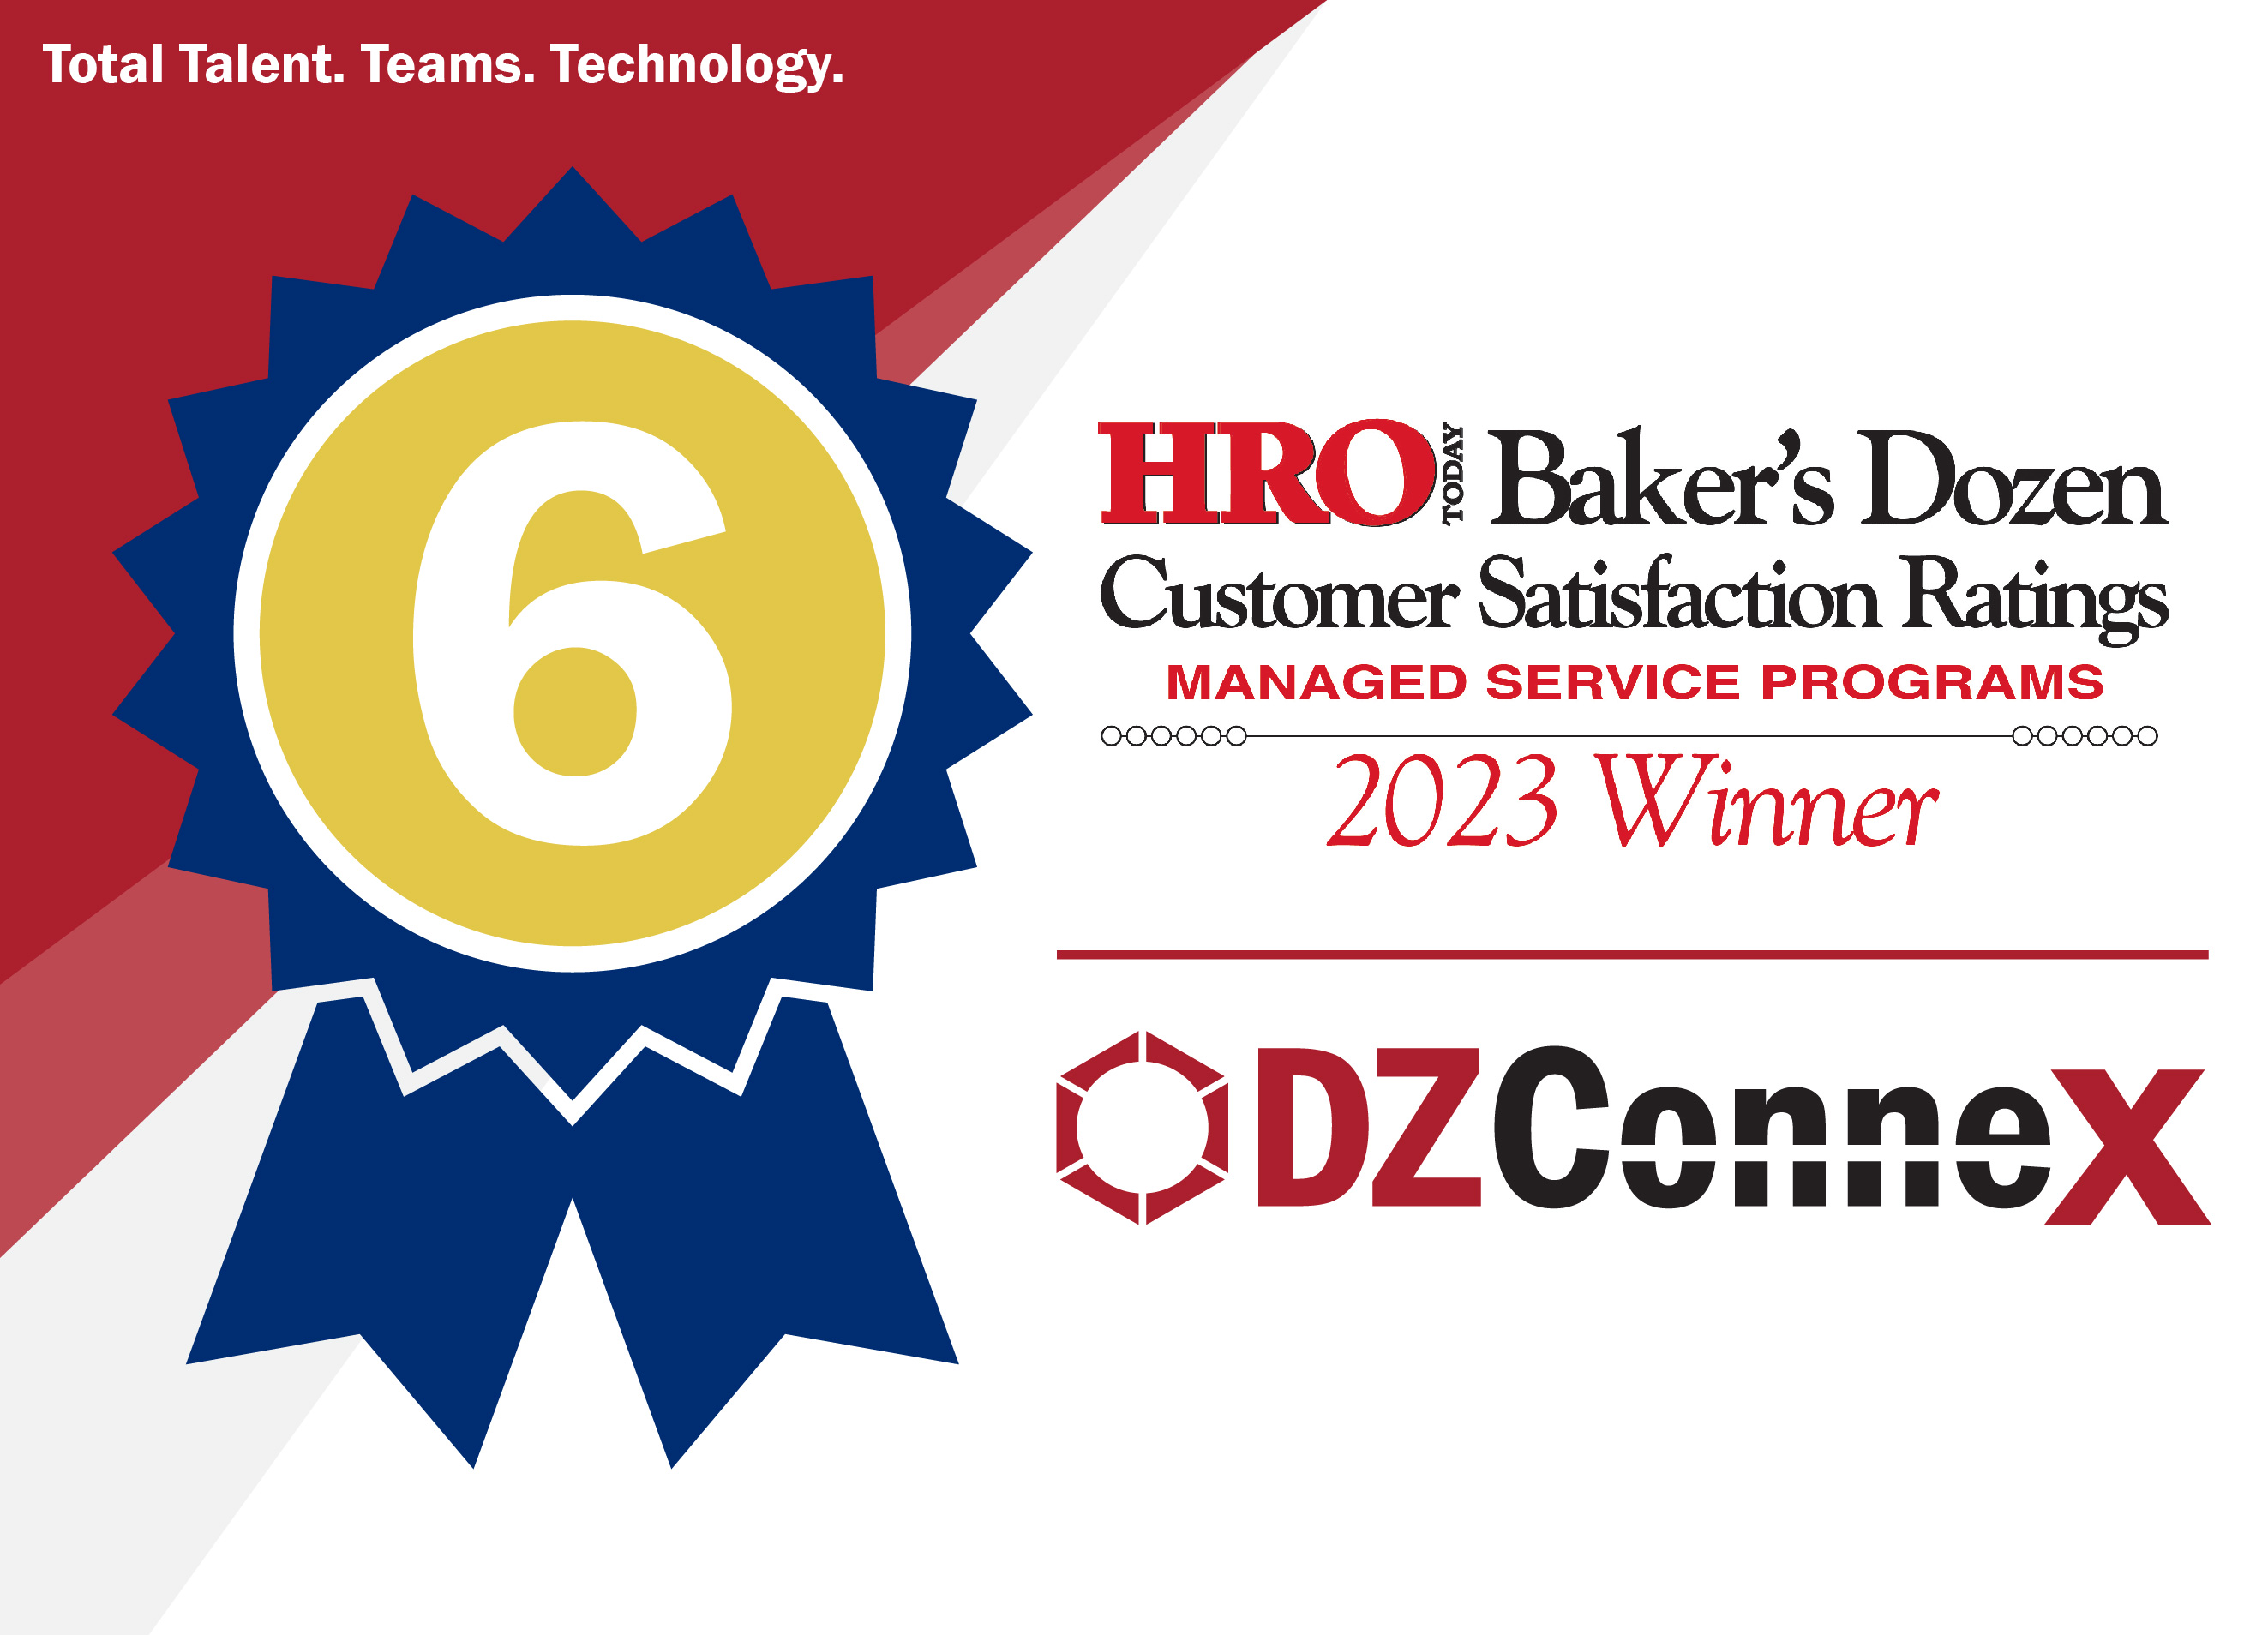 DZConneX Recognized on Baker’s Dozen Customer Satisfaction Ratings for Managed Service Providers for 13th Straight Year